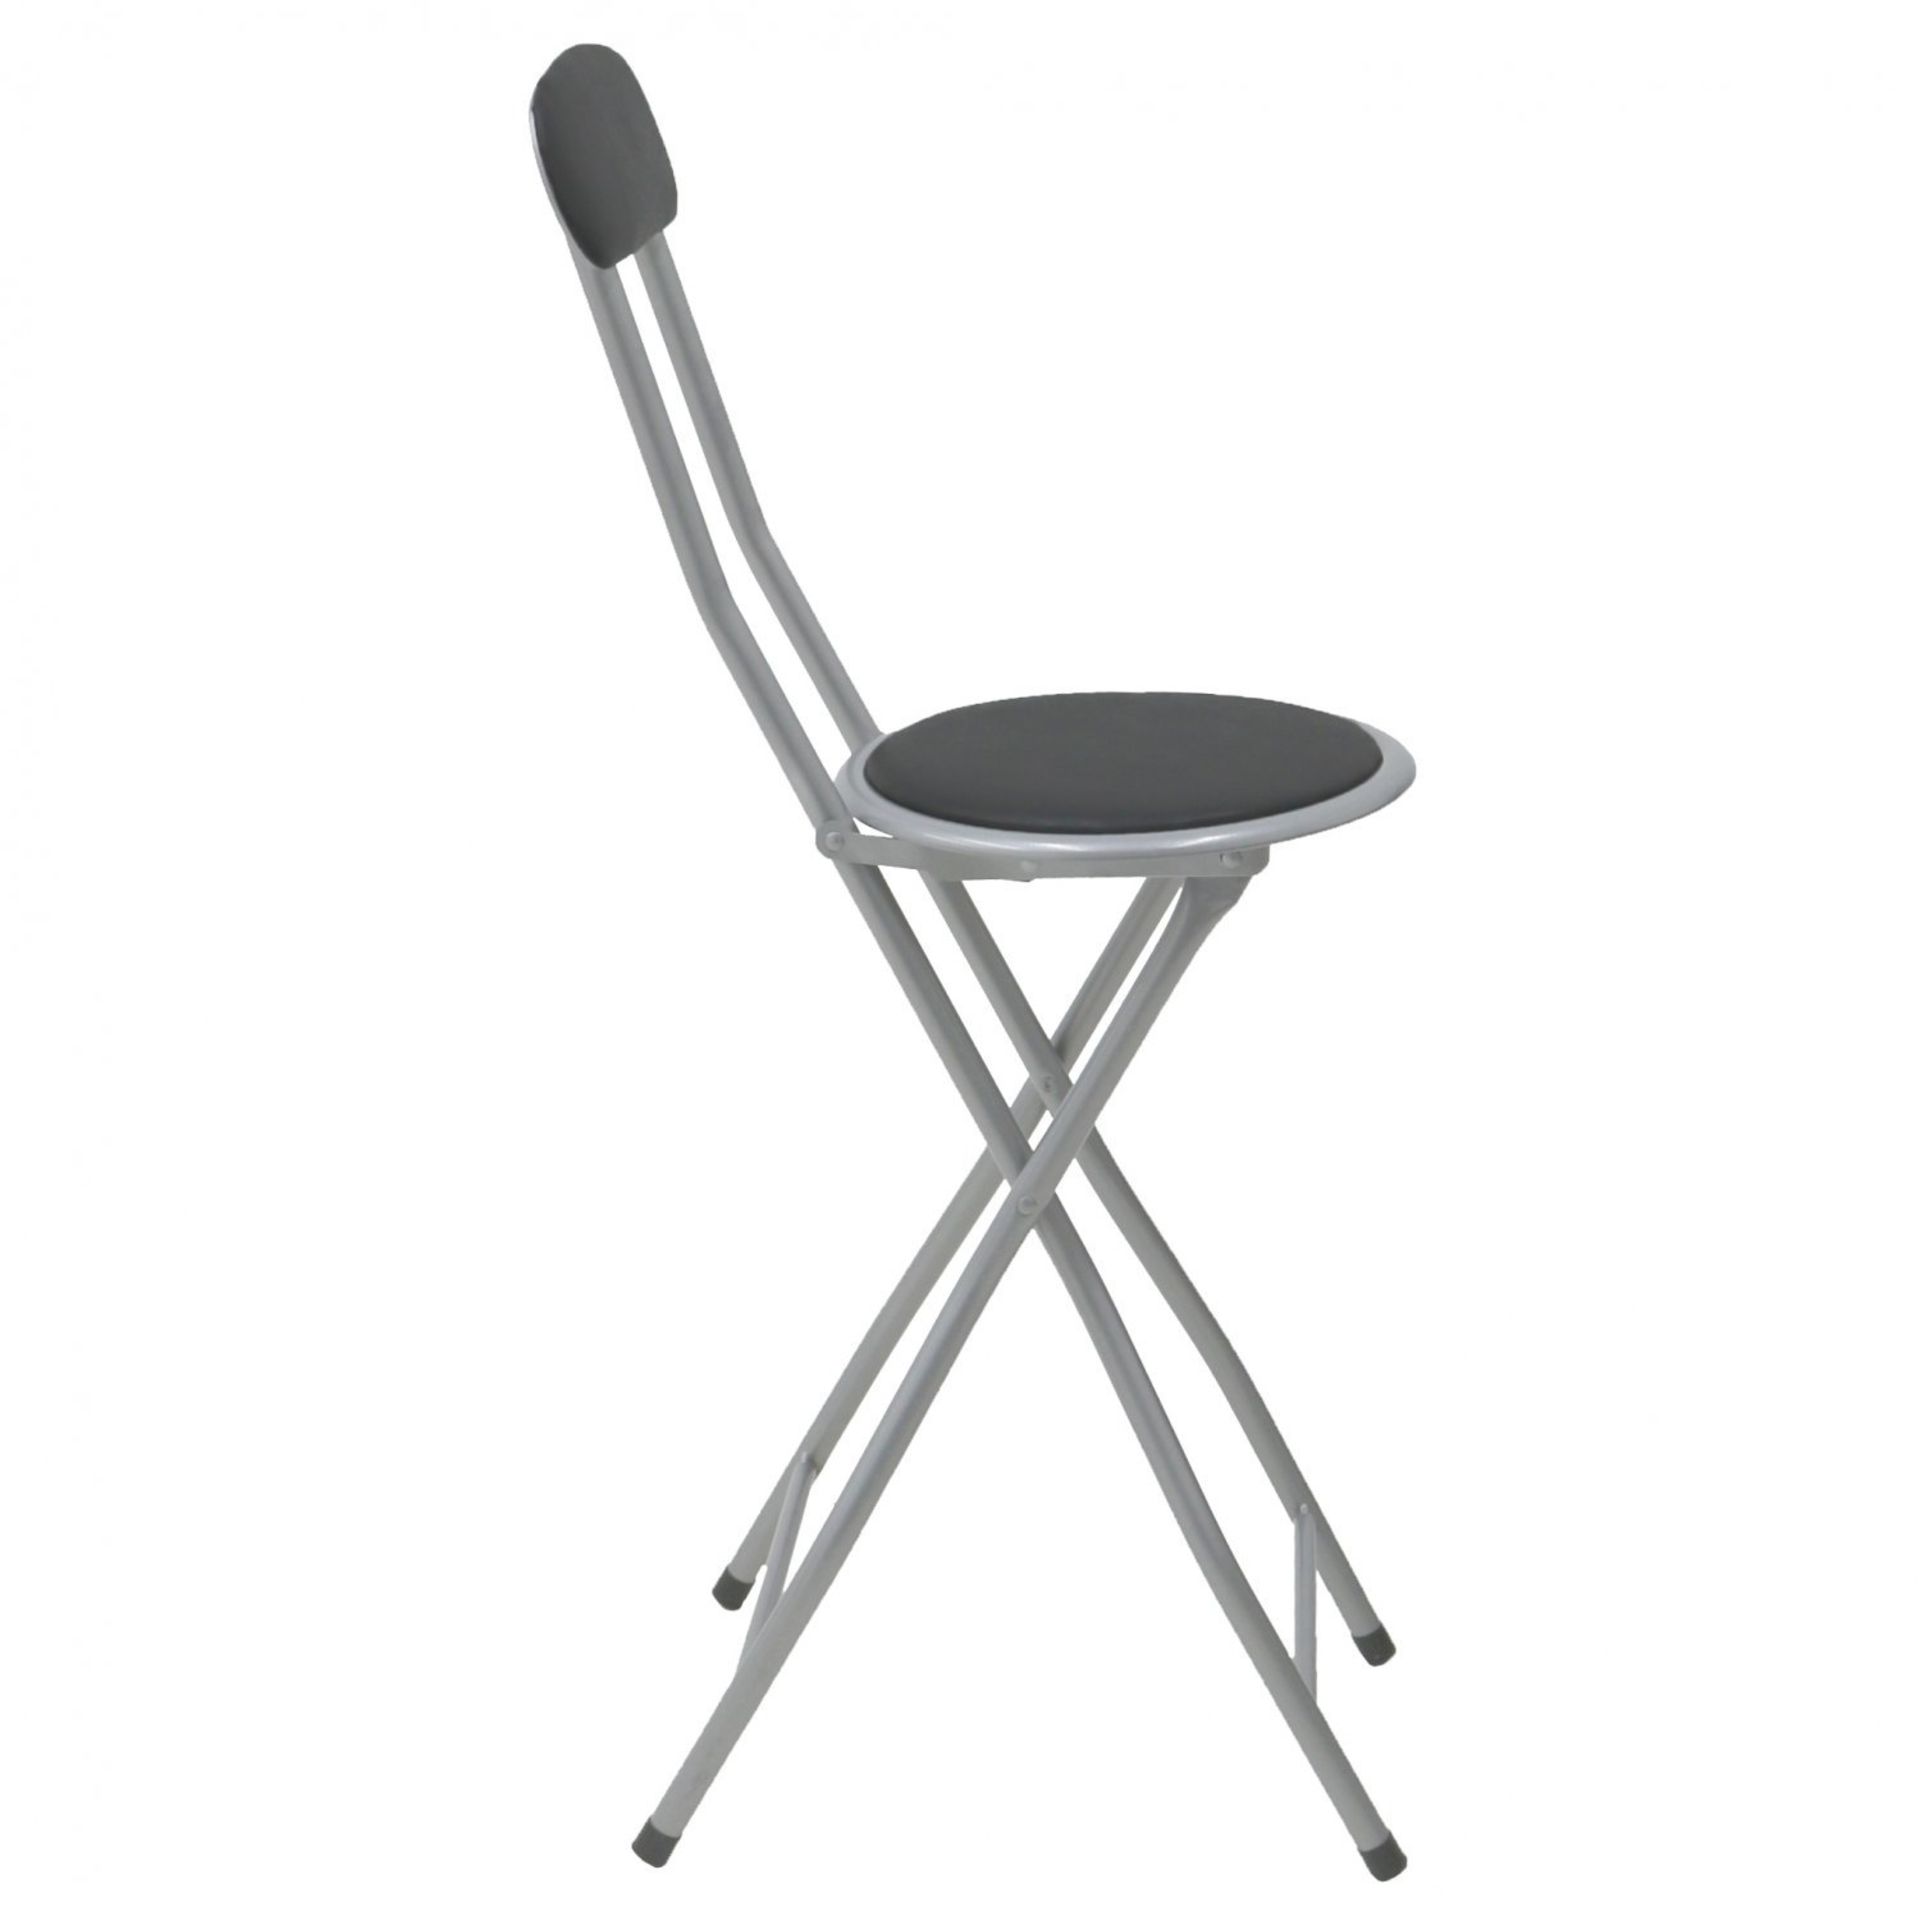 (RL23) Black Padded Folding High Chair Breakfast Kitchen Bar Stool Seat Perfect for sitting ... - Image 2 of 2